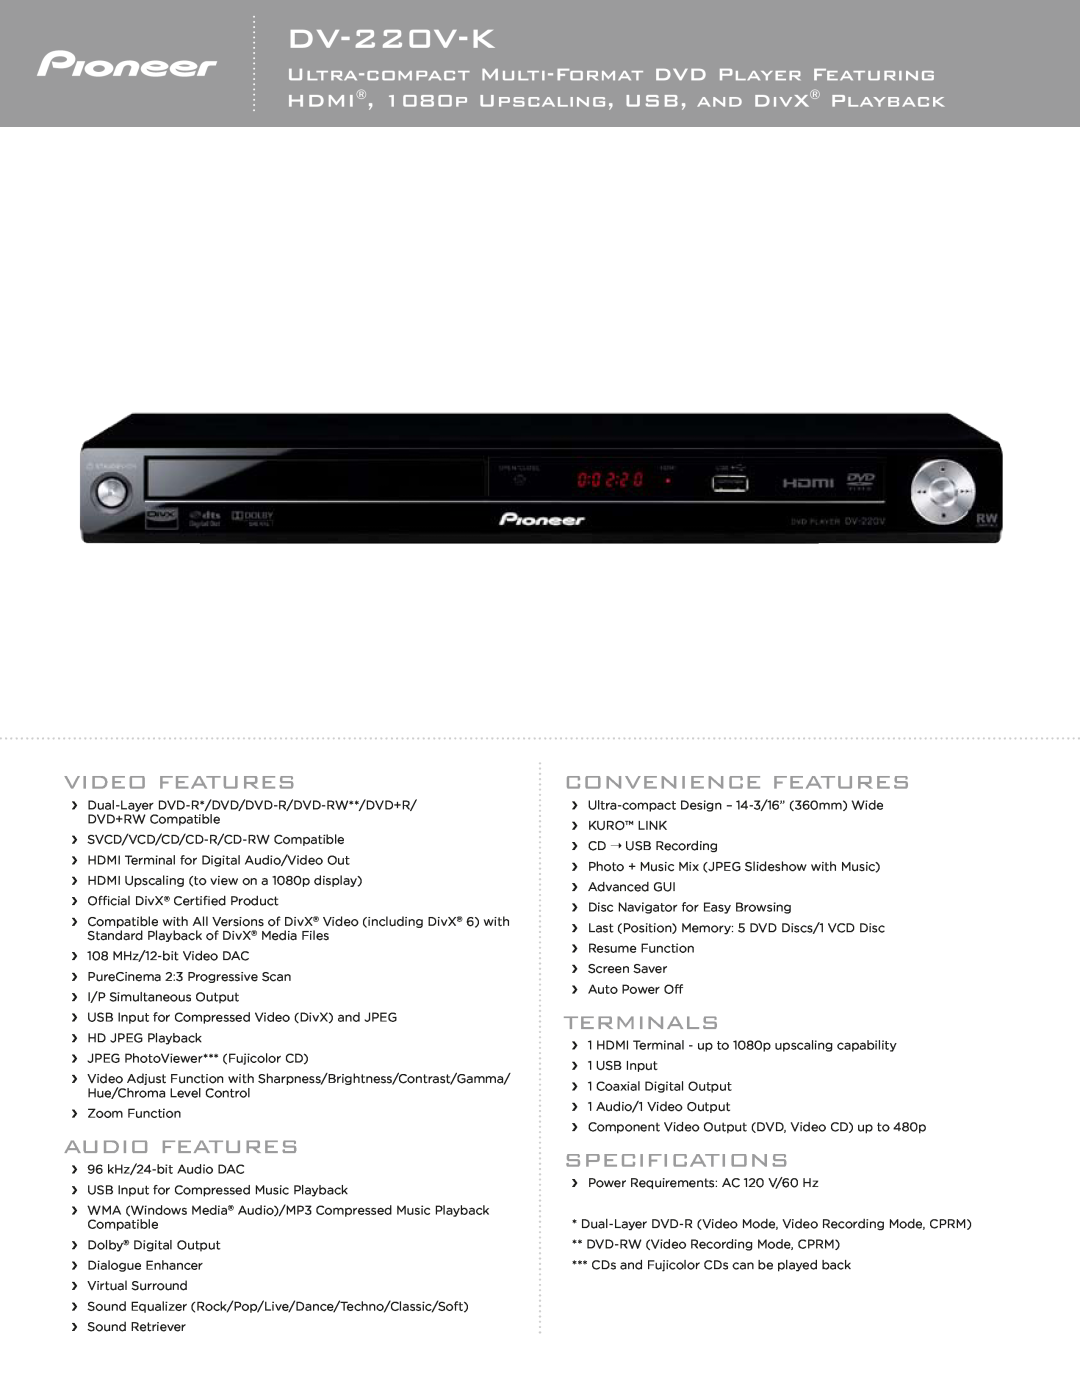 Pioneer DV-220V-K specifications Video Features, Audio Features, Convenience Features, Terminals, Specifications 